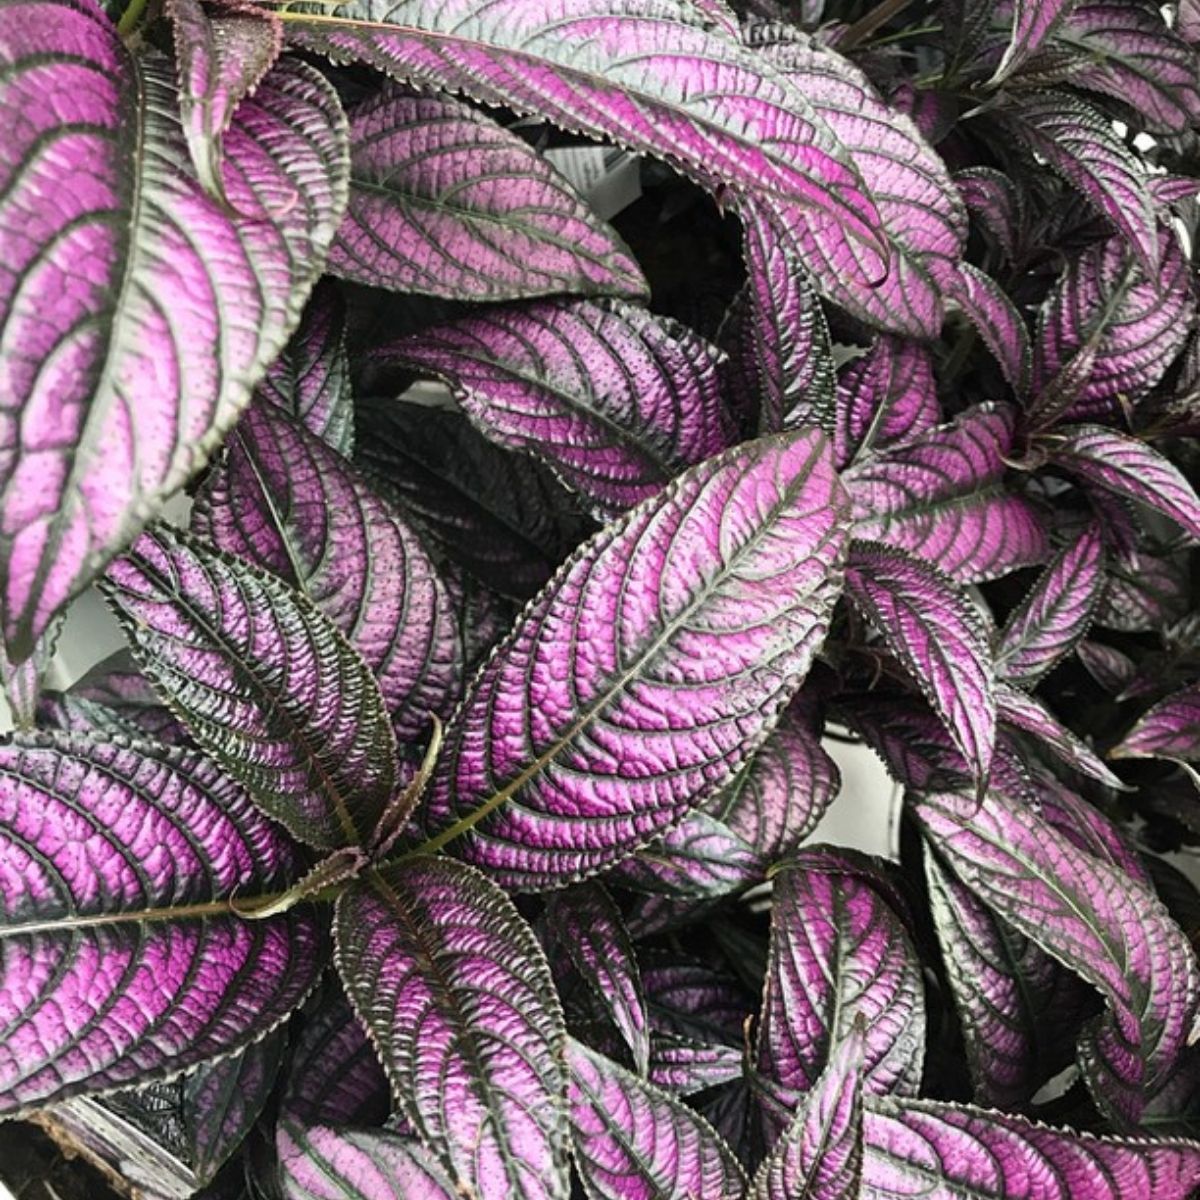 Persian Shield impossible to kill outdoor plant - on Thursd 